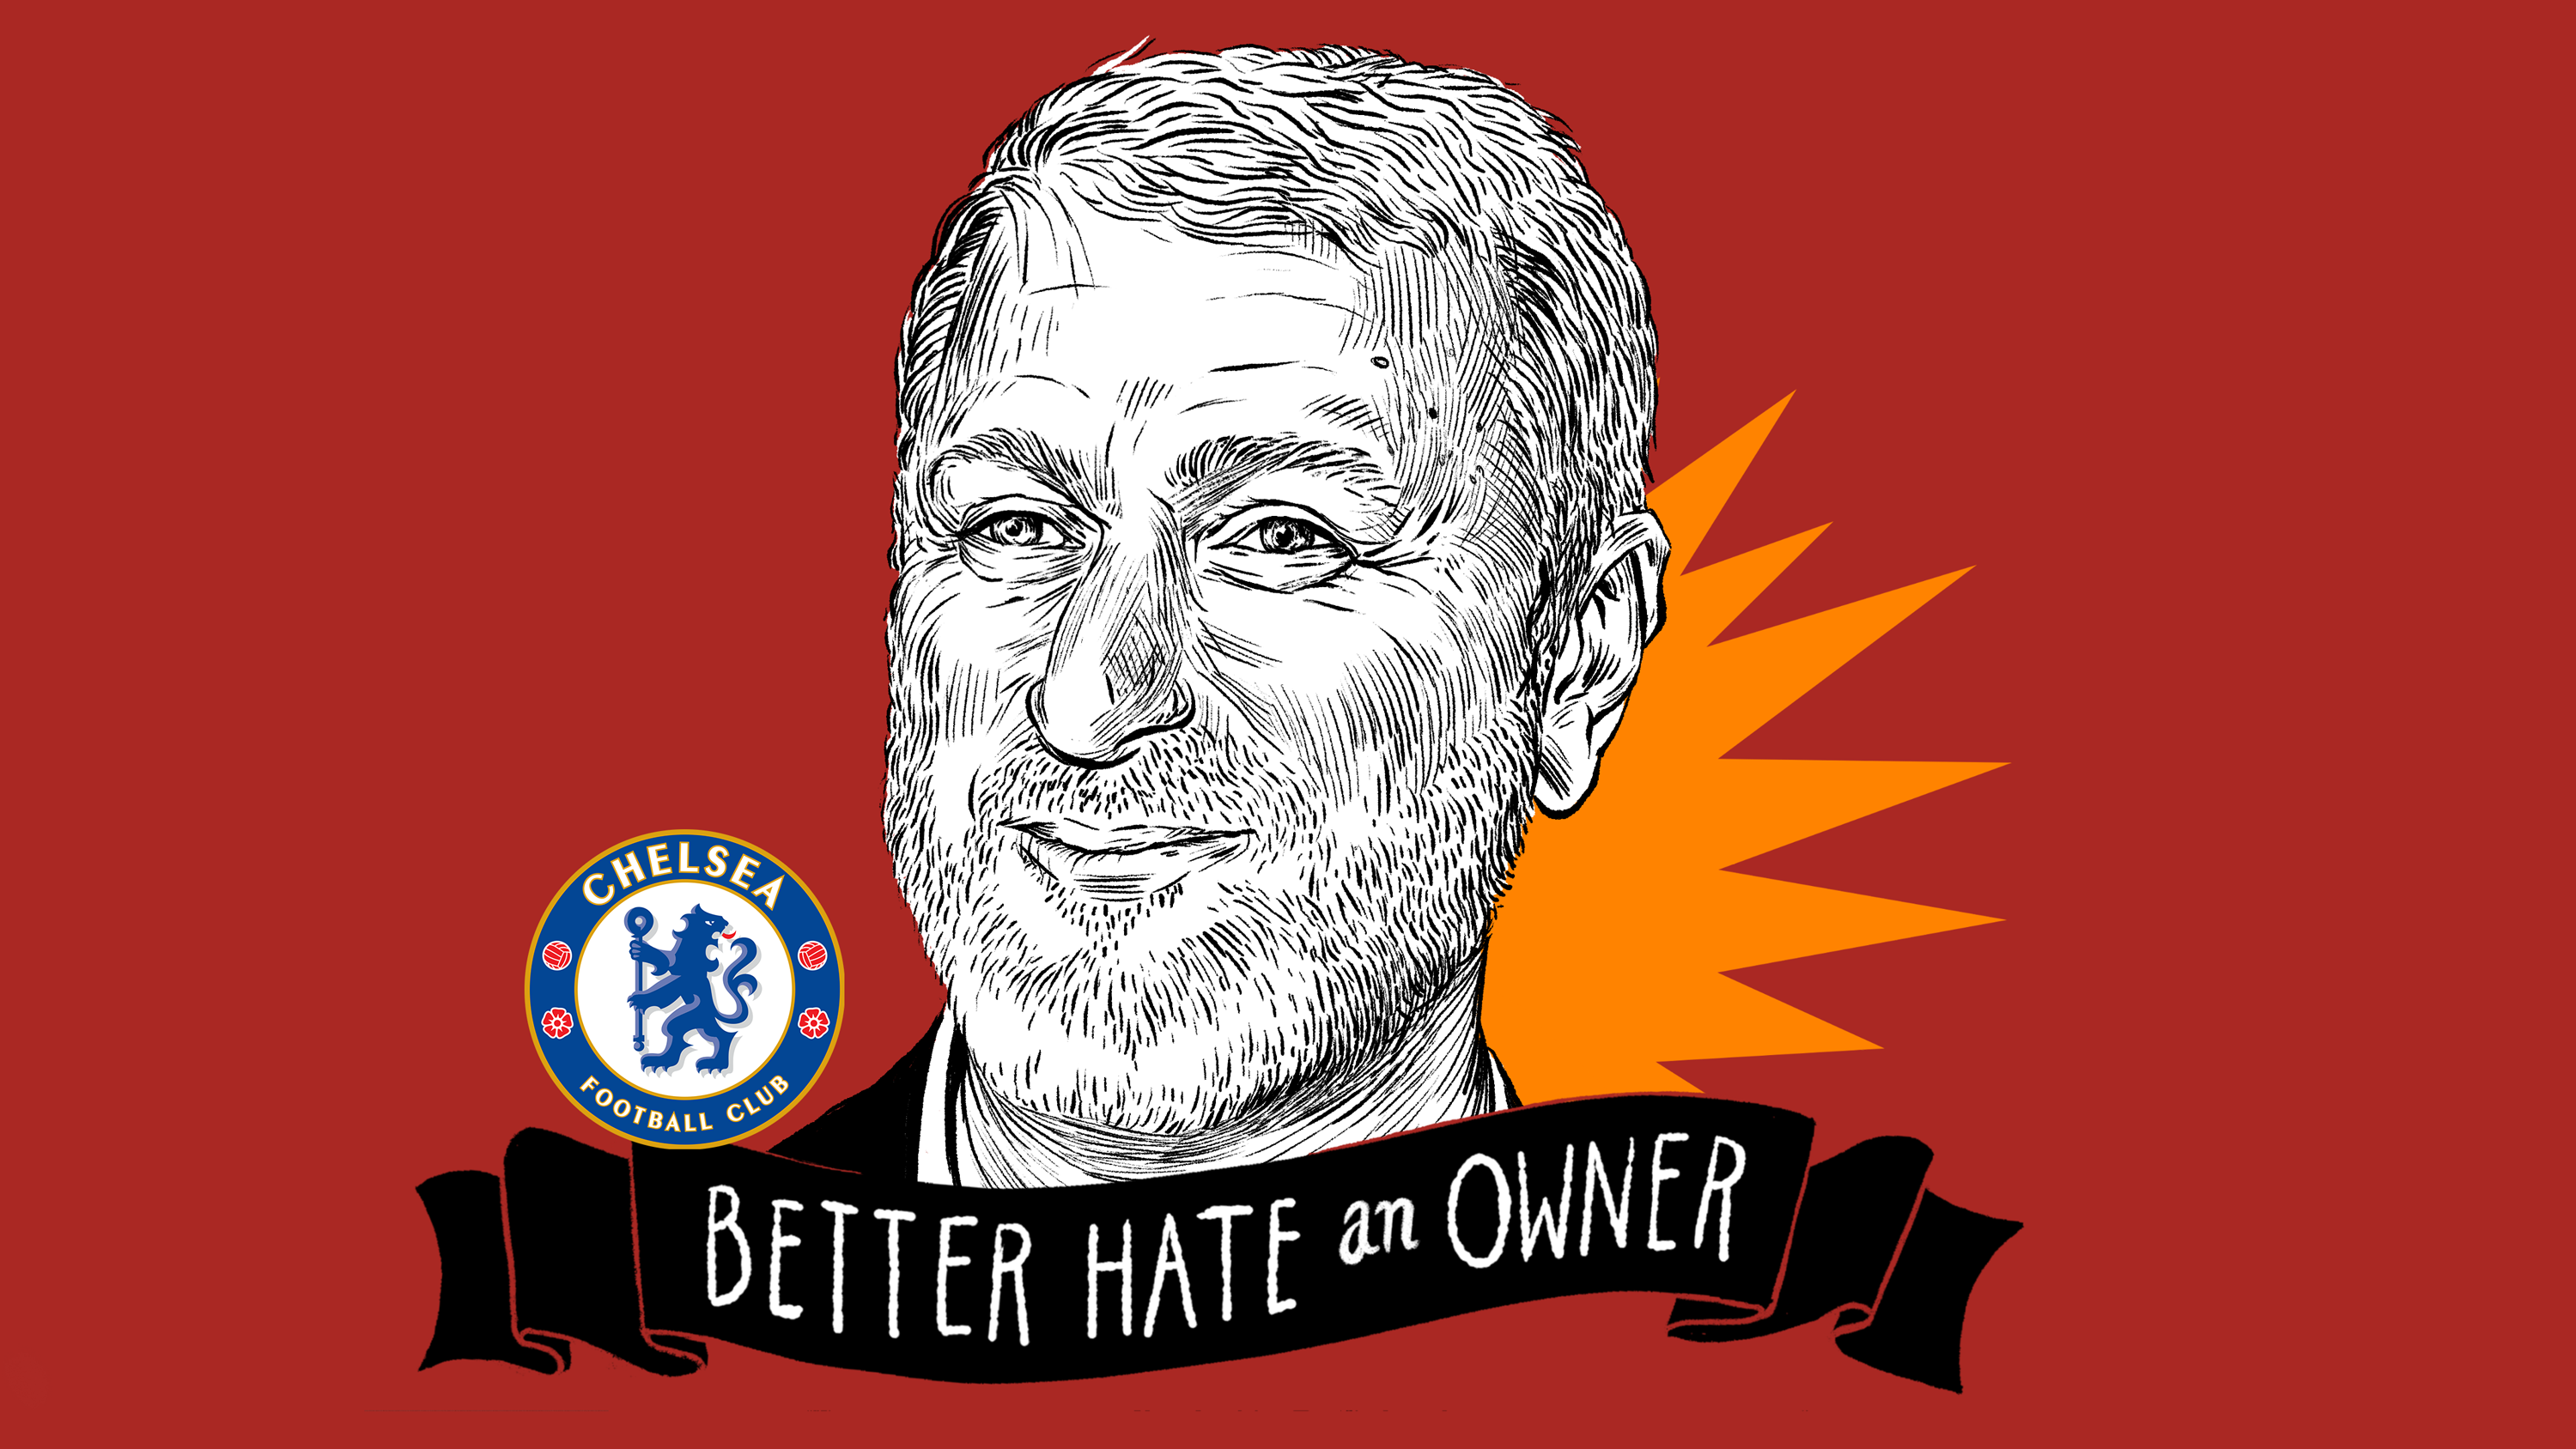 Chelsea FC Faces Life After Roman Abramovich Sanctions With No Money -  Bloomberg